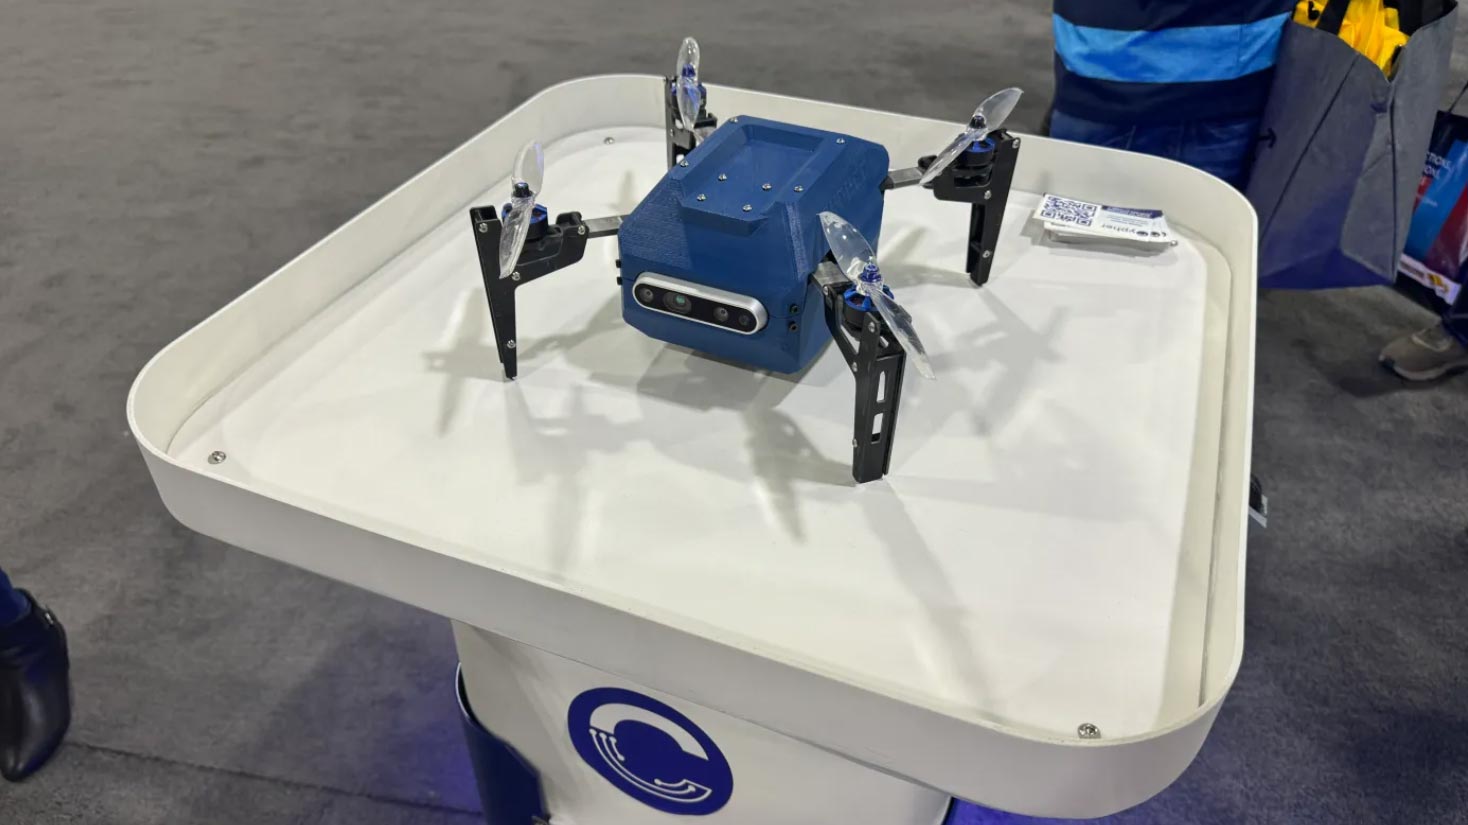 Cipher's inventory drone is launched from an autonomous mobile robot base